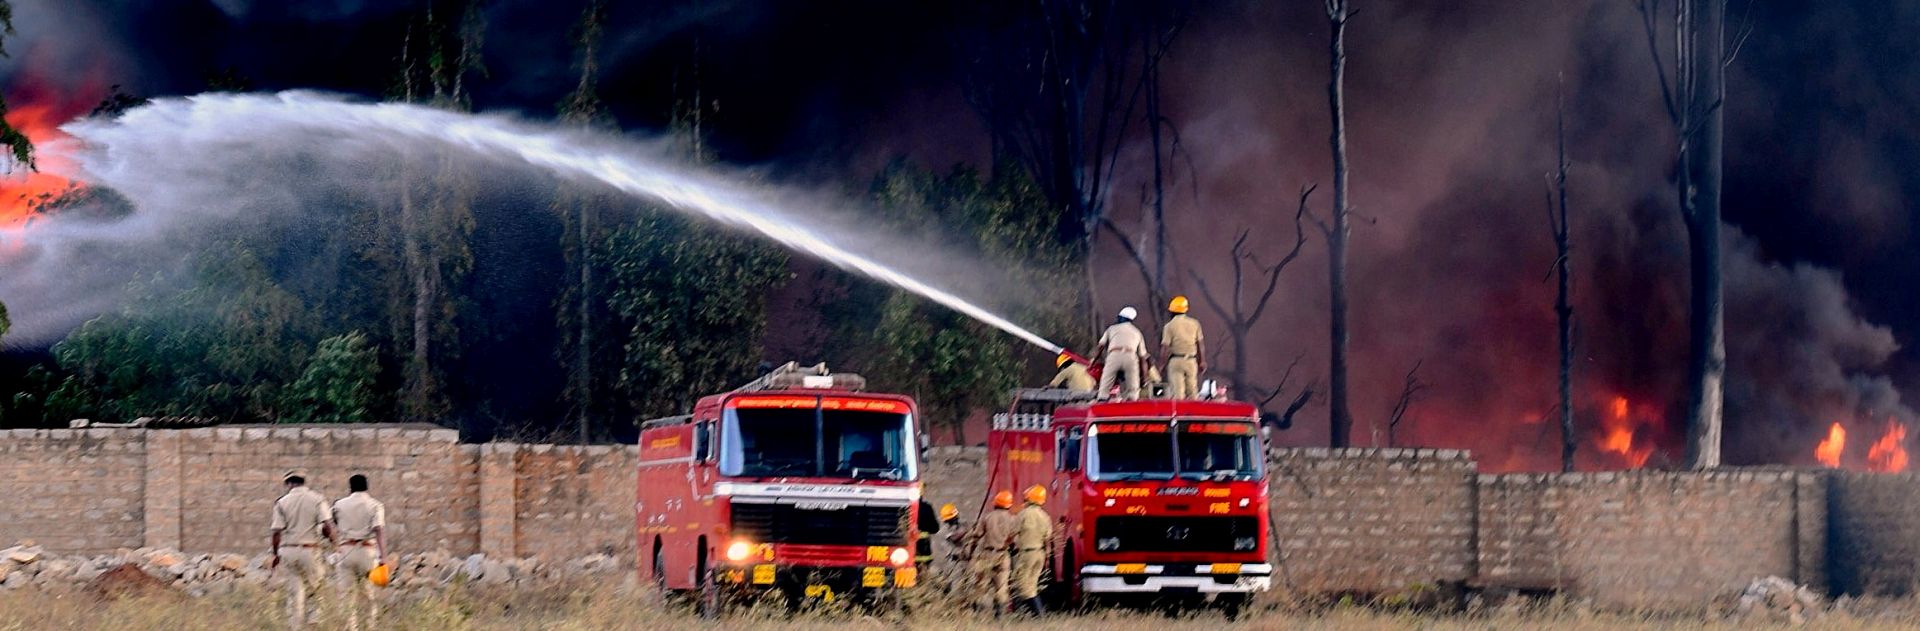 epa07366721 Indian firefighters try to extinguish flames after a fire broke out at the United Paint factory stockyard in madanayakanahalli, on the outskirts of Bangalore, India, 13 February 2019. According to police and media reports, about 15 fire engines fought for close to four hours to extinguish the blaze. No casualties have been reported in the incident so far.  EPA/JAGADEESH NV